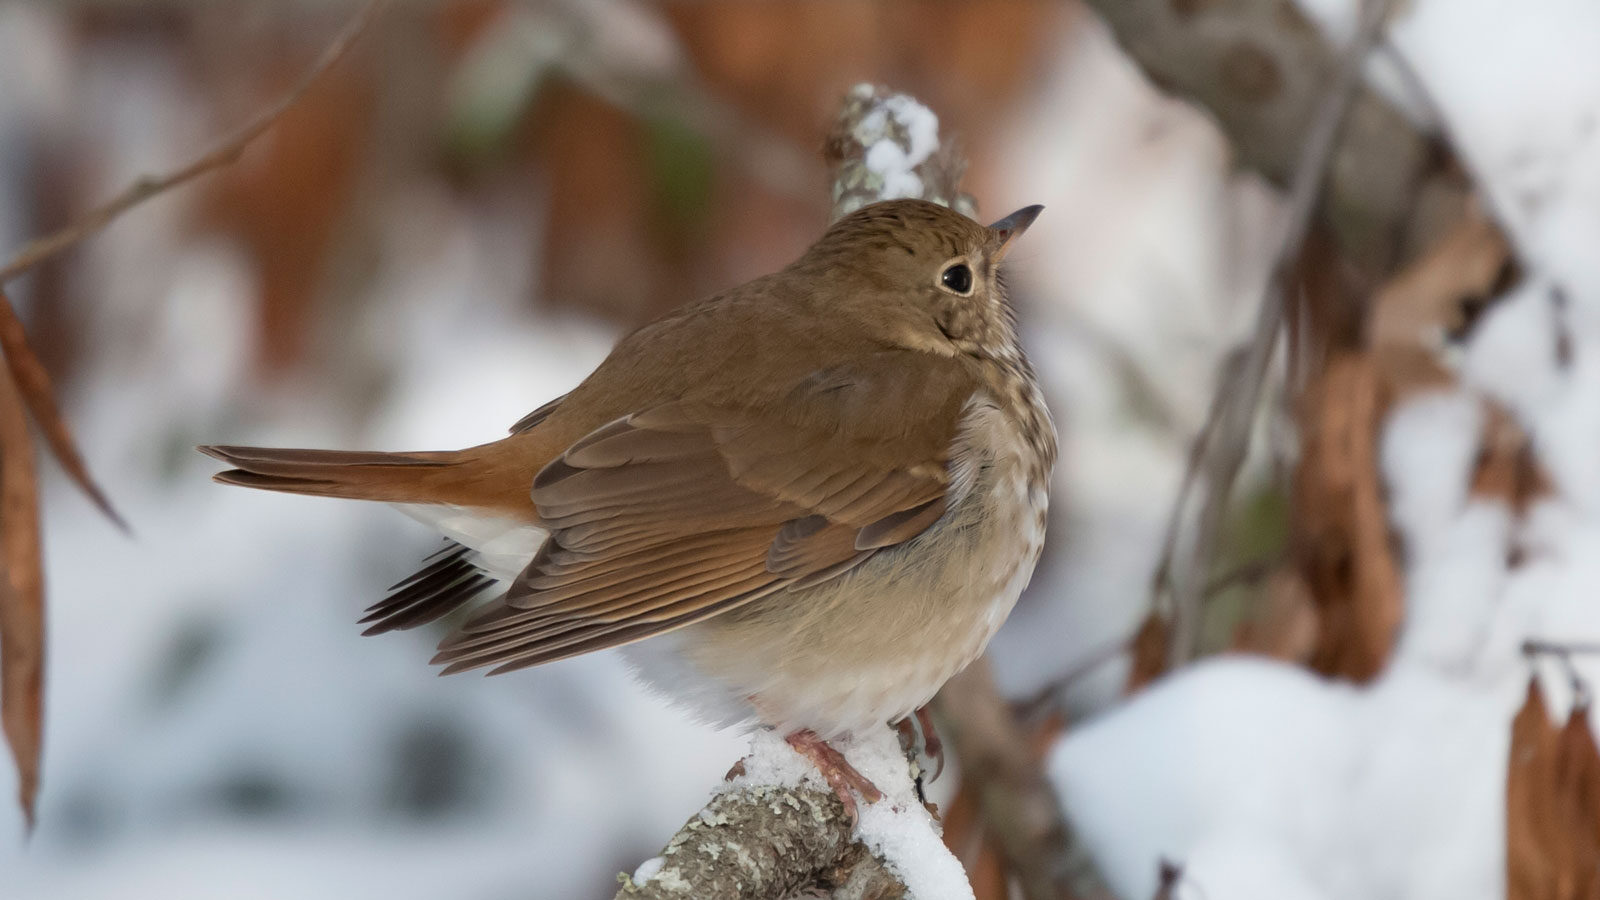 Hermit thrush looking around from its perch on a snow-covered tree branch